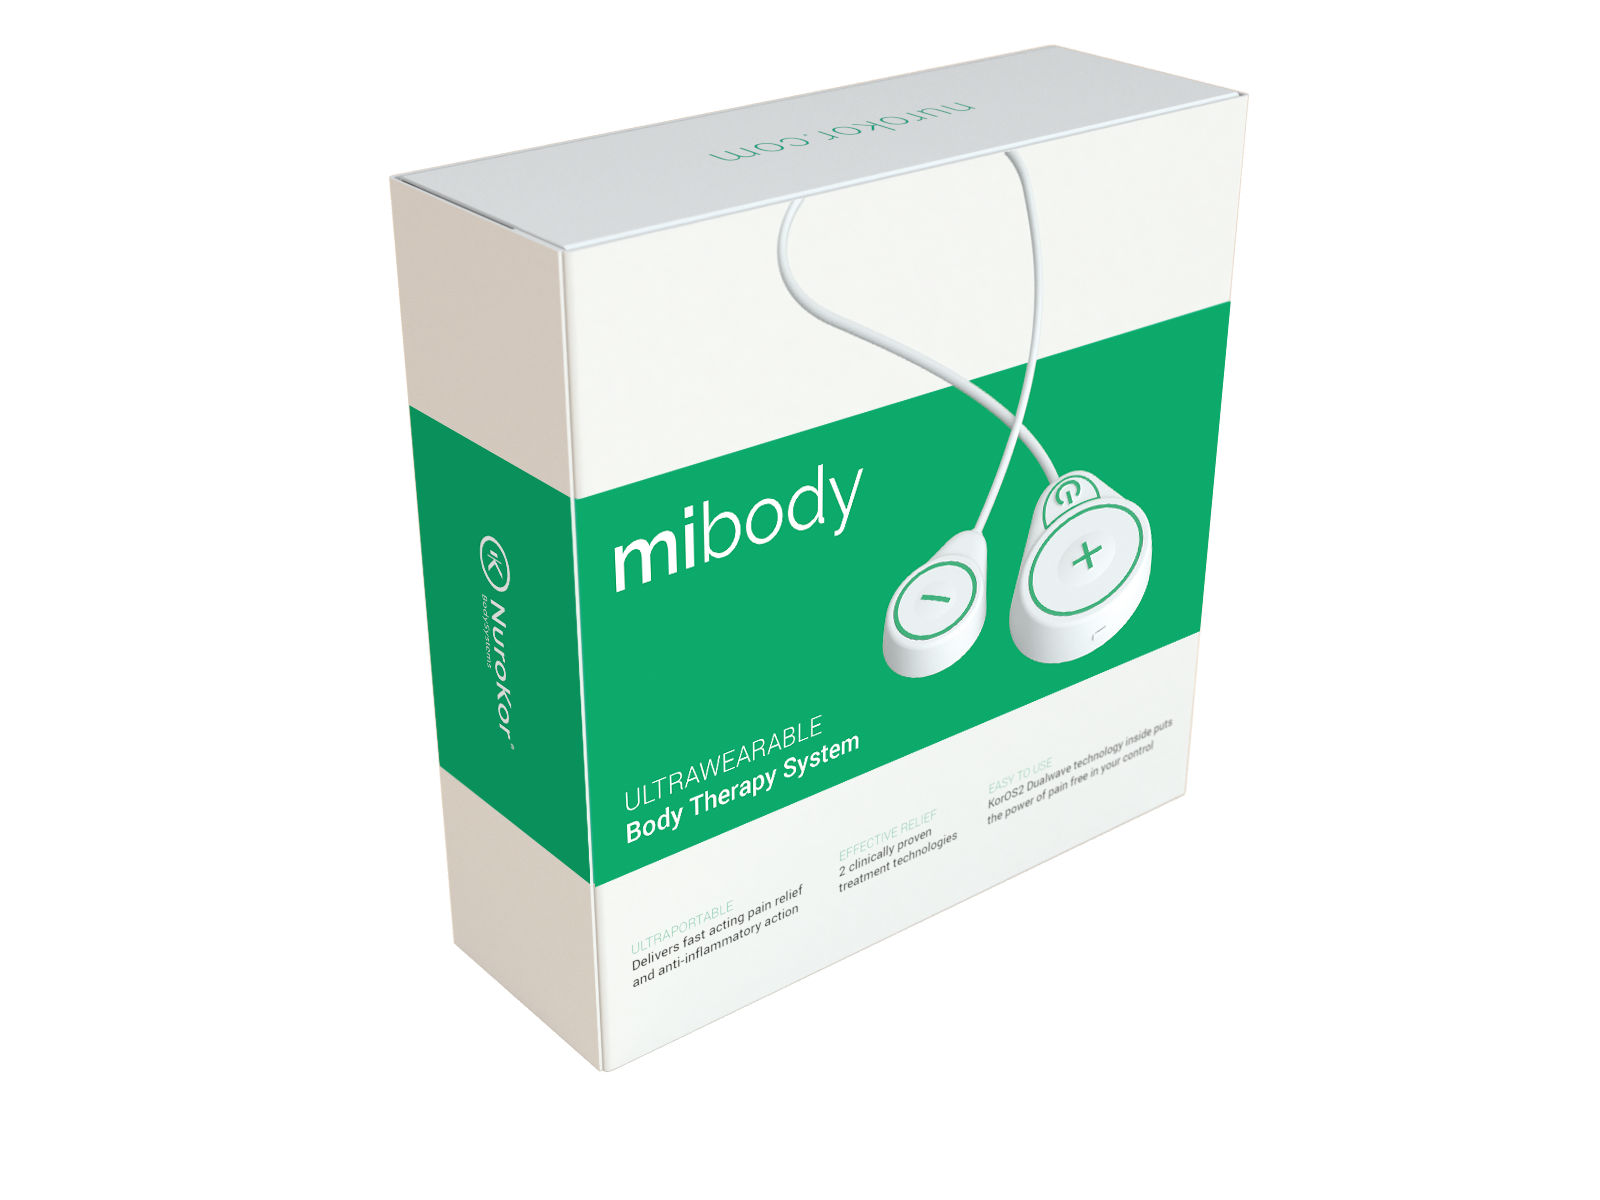 mibody - Ultra Wearable Therapy